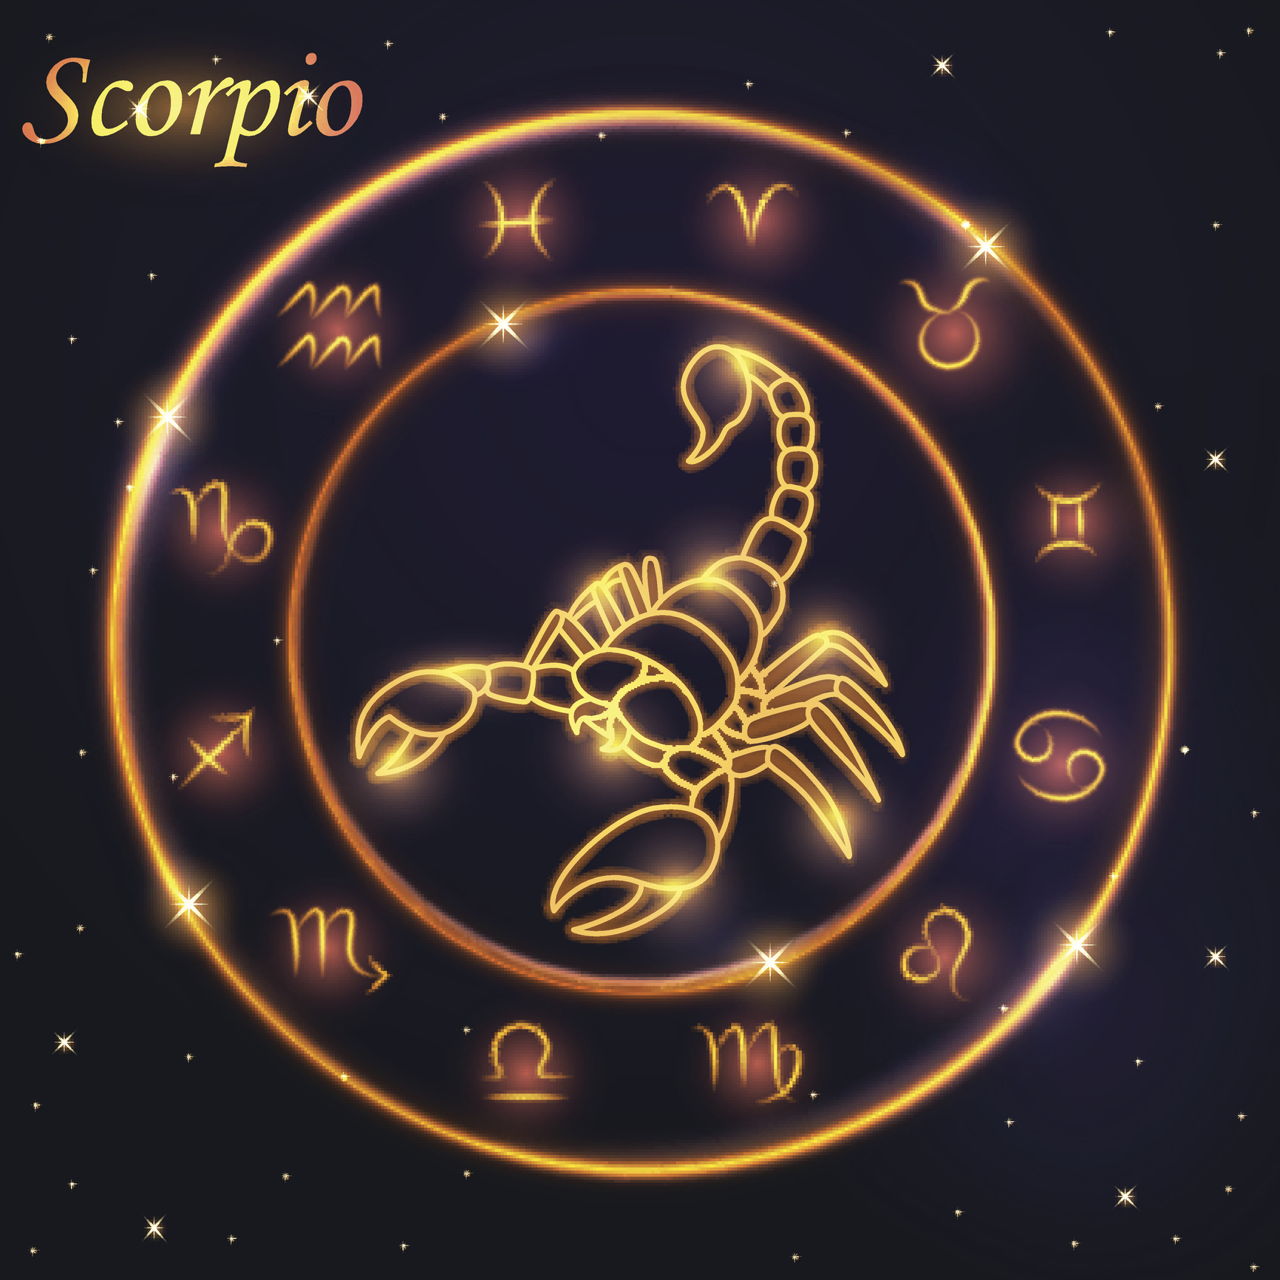 All clues leading Scorpio to be on an important and upward route